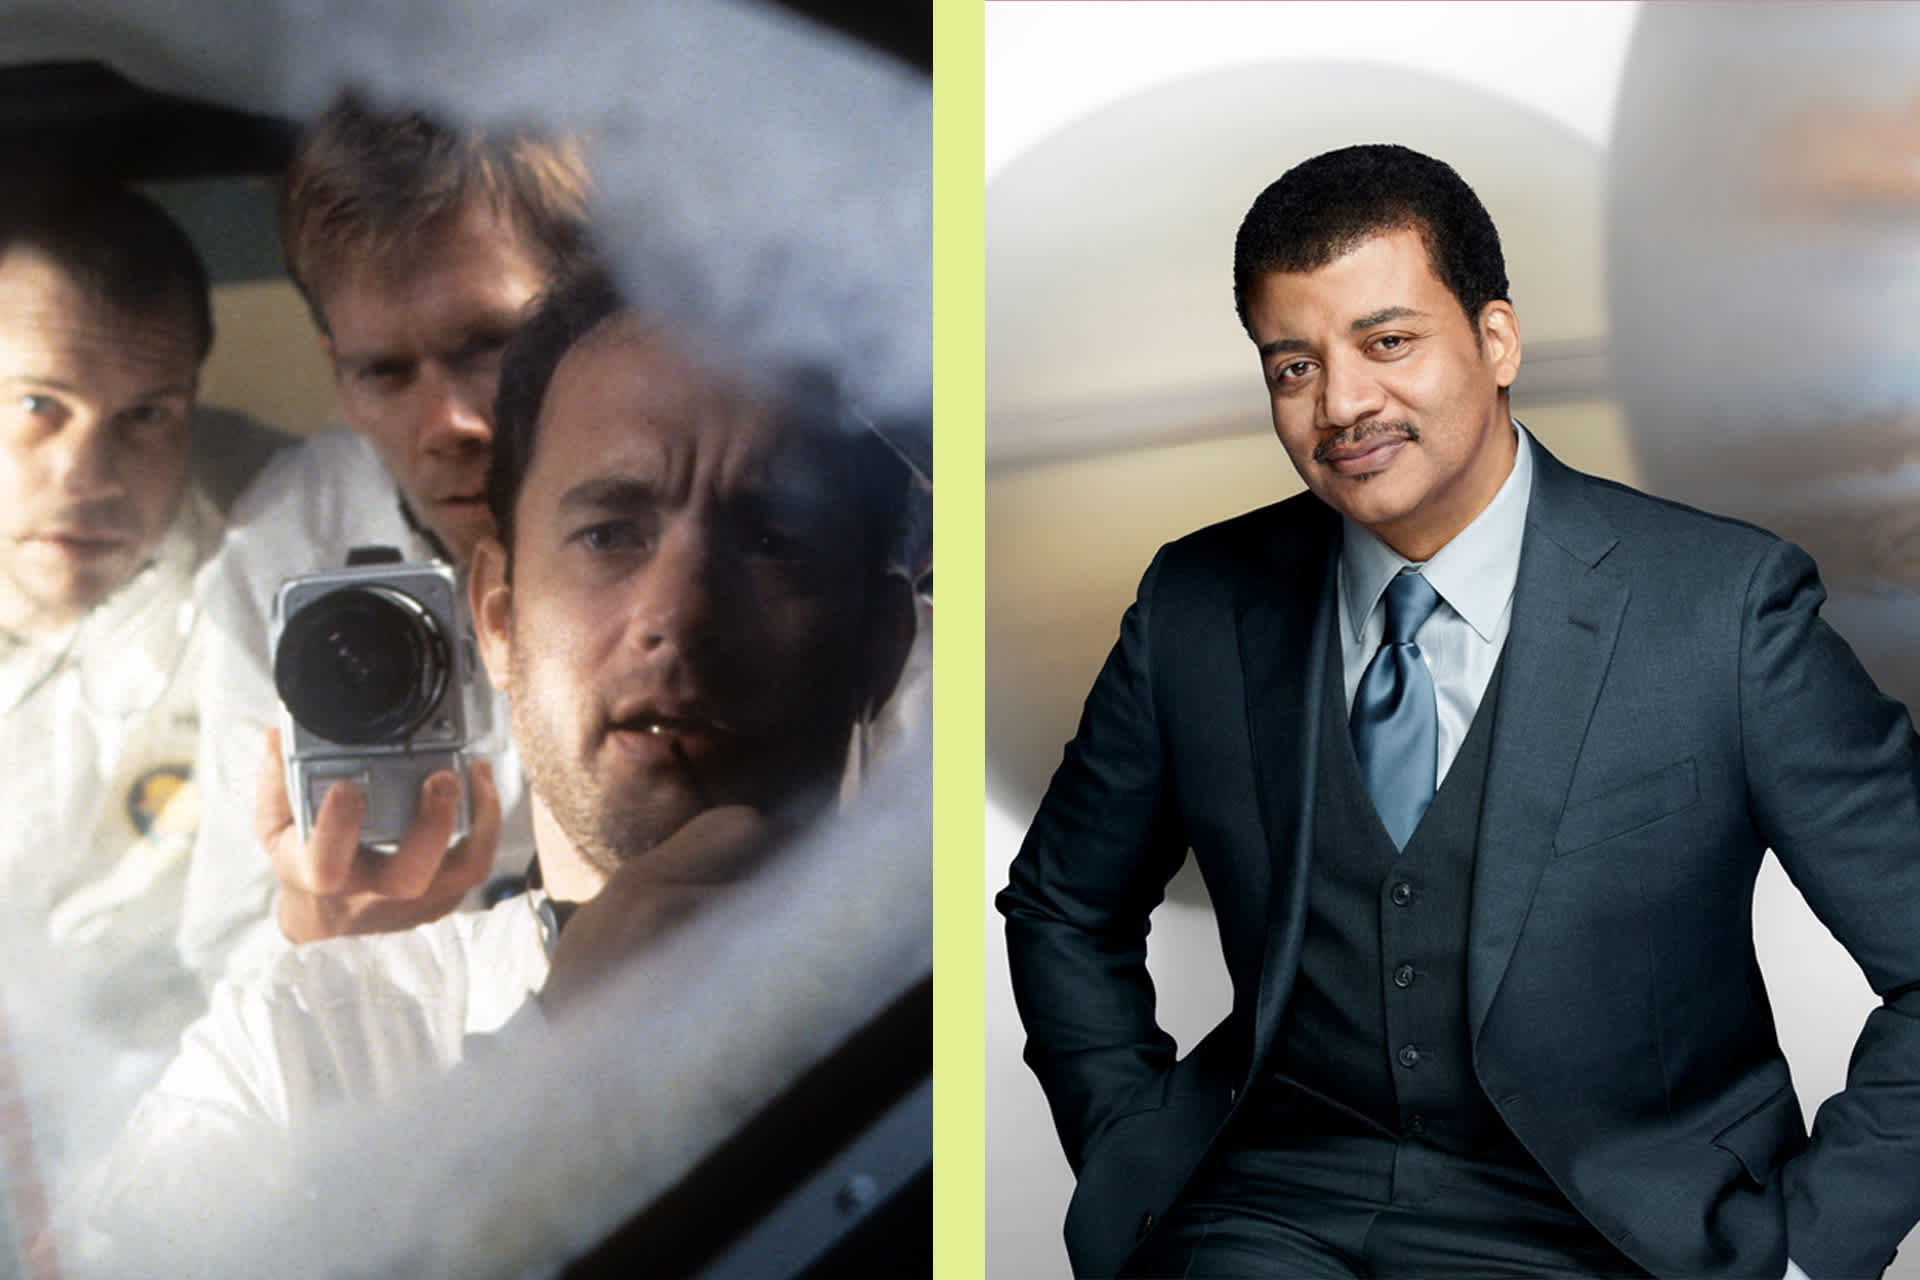 Collage of two images stitched together; left image is a scene from a movie and the right image is a headshot of Neil deGrasse Tyson.